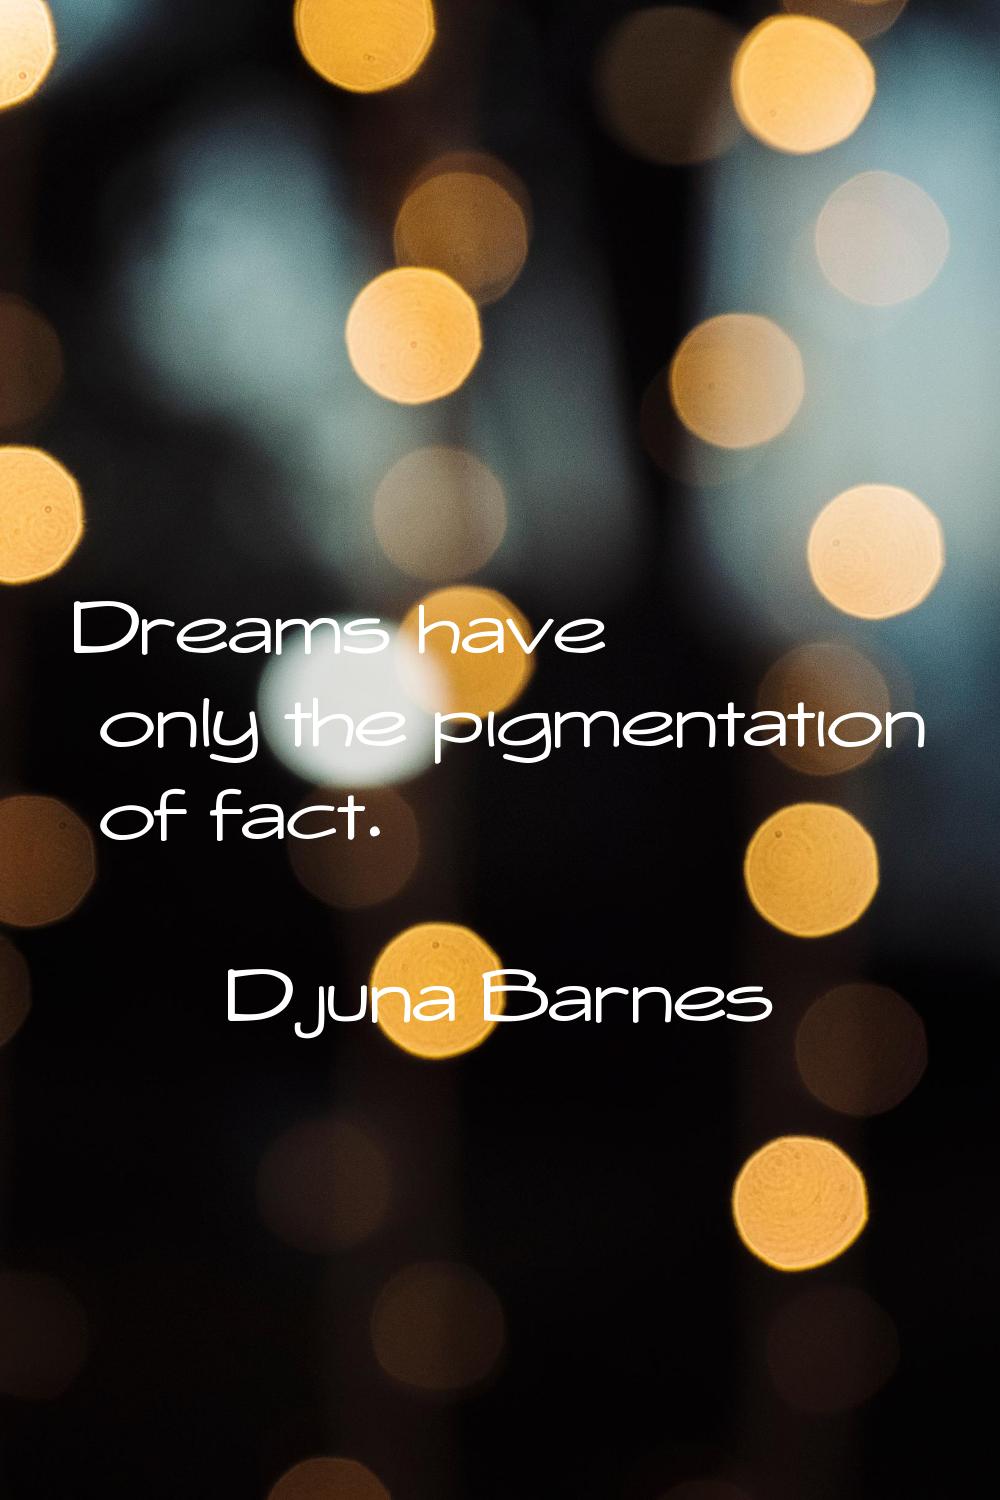 Dreams have only the pigmentation of fact.